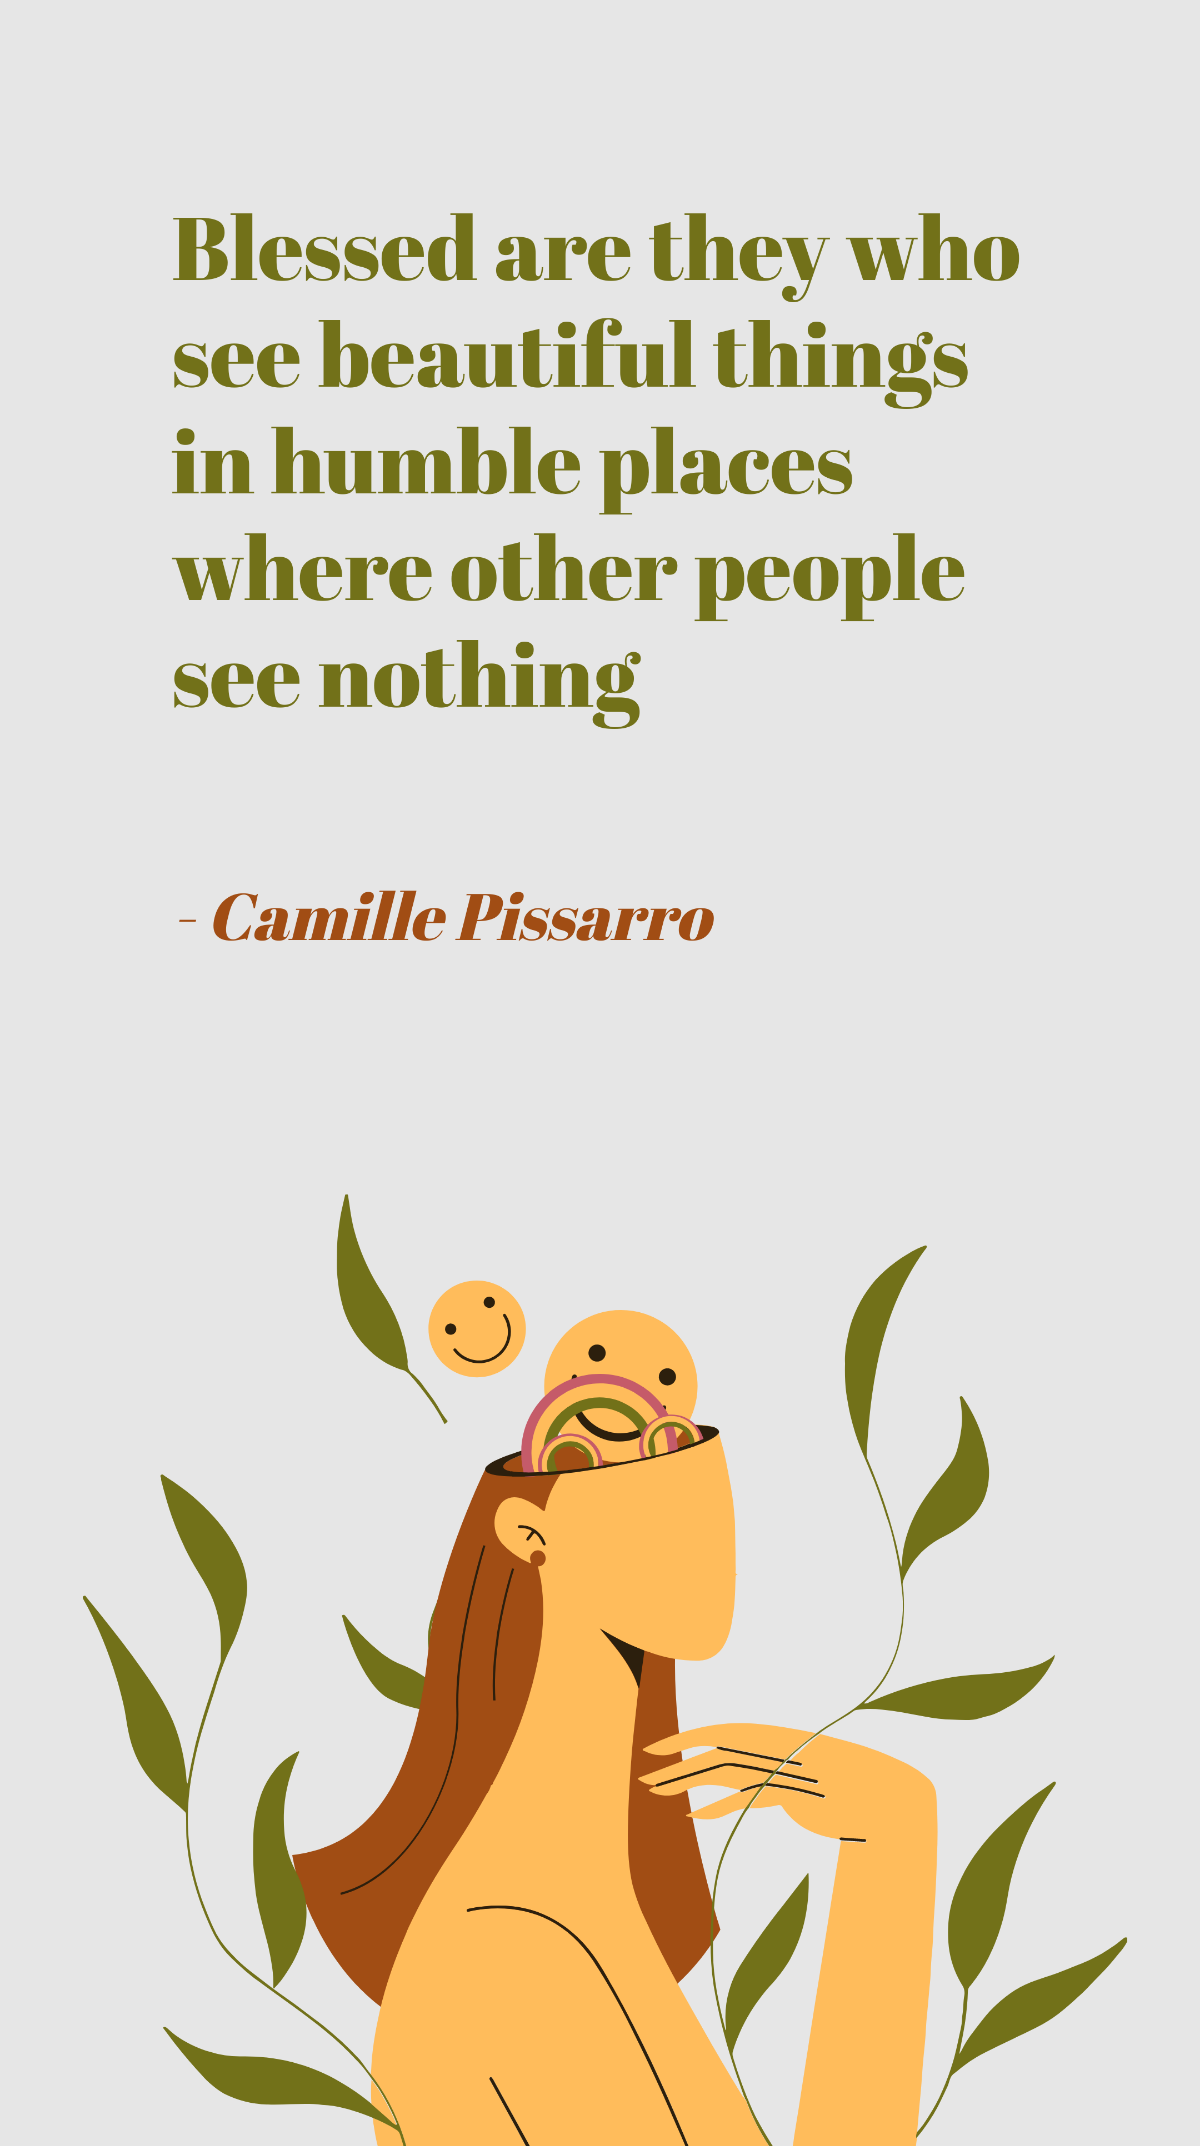 Camille Pissarro - Blessed are they who see beautiful things in humble places where other people see nothing Template